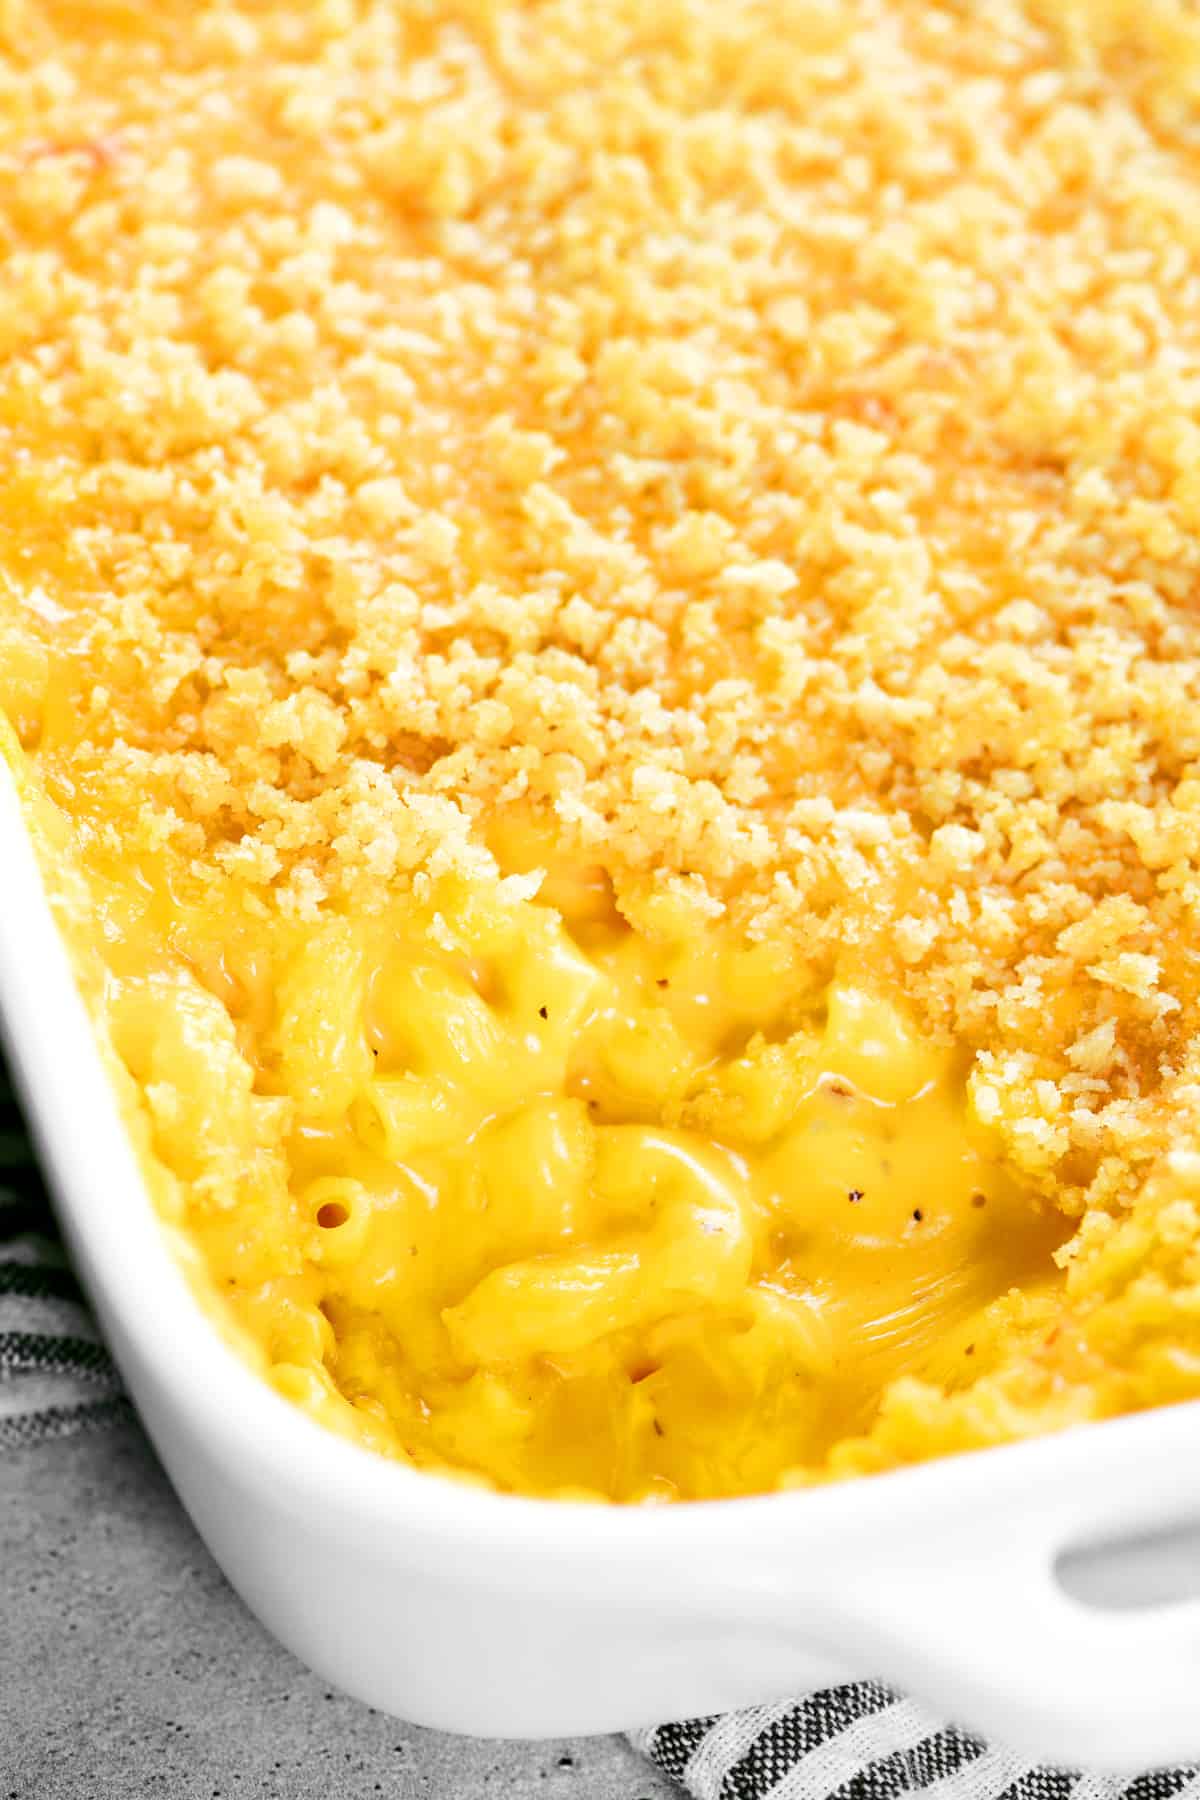 Baked Mac and Cheese - The Gunny Sack